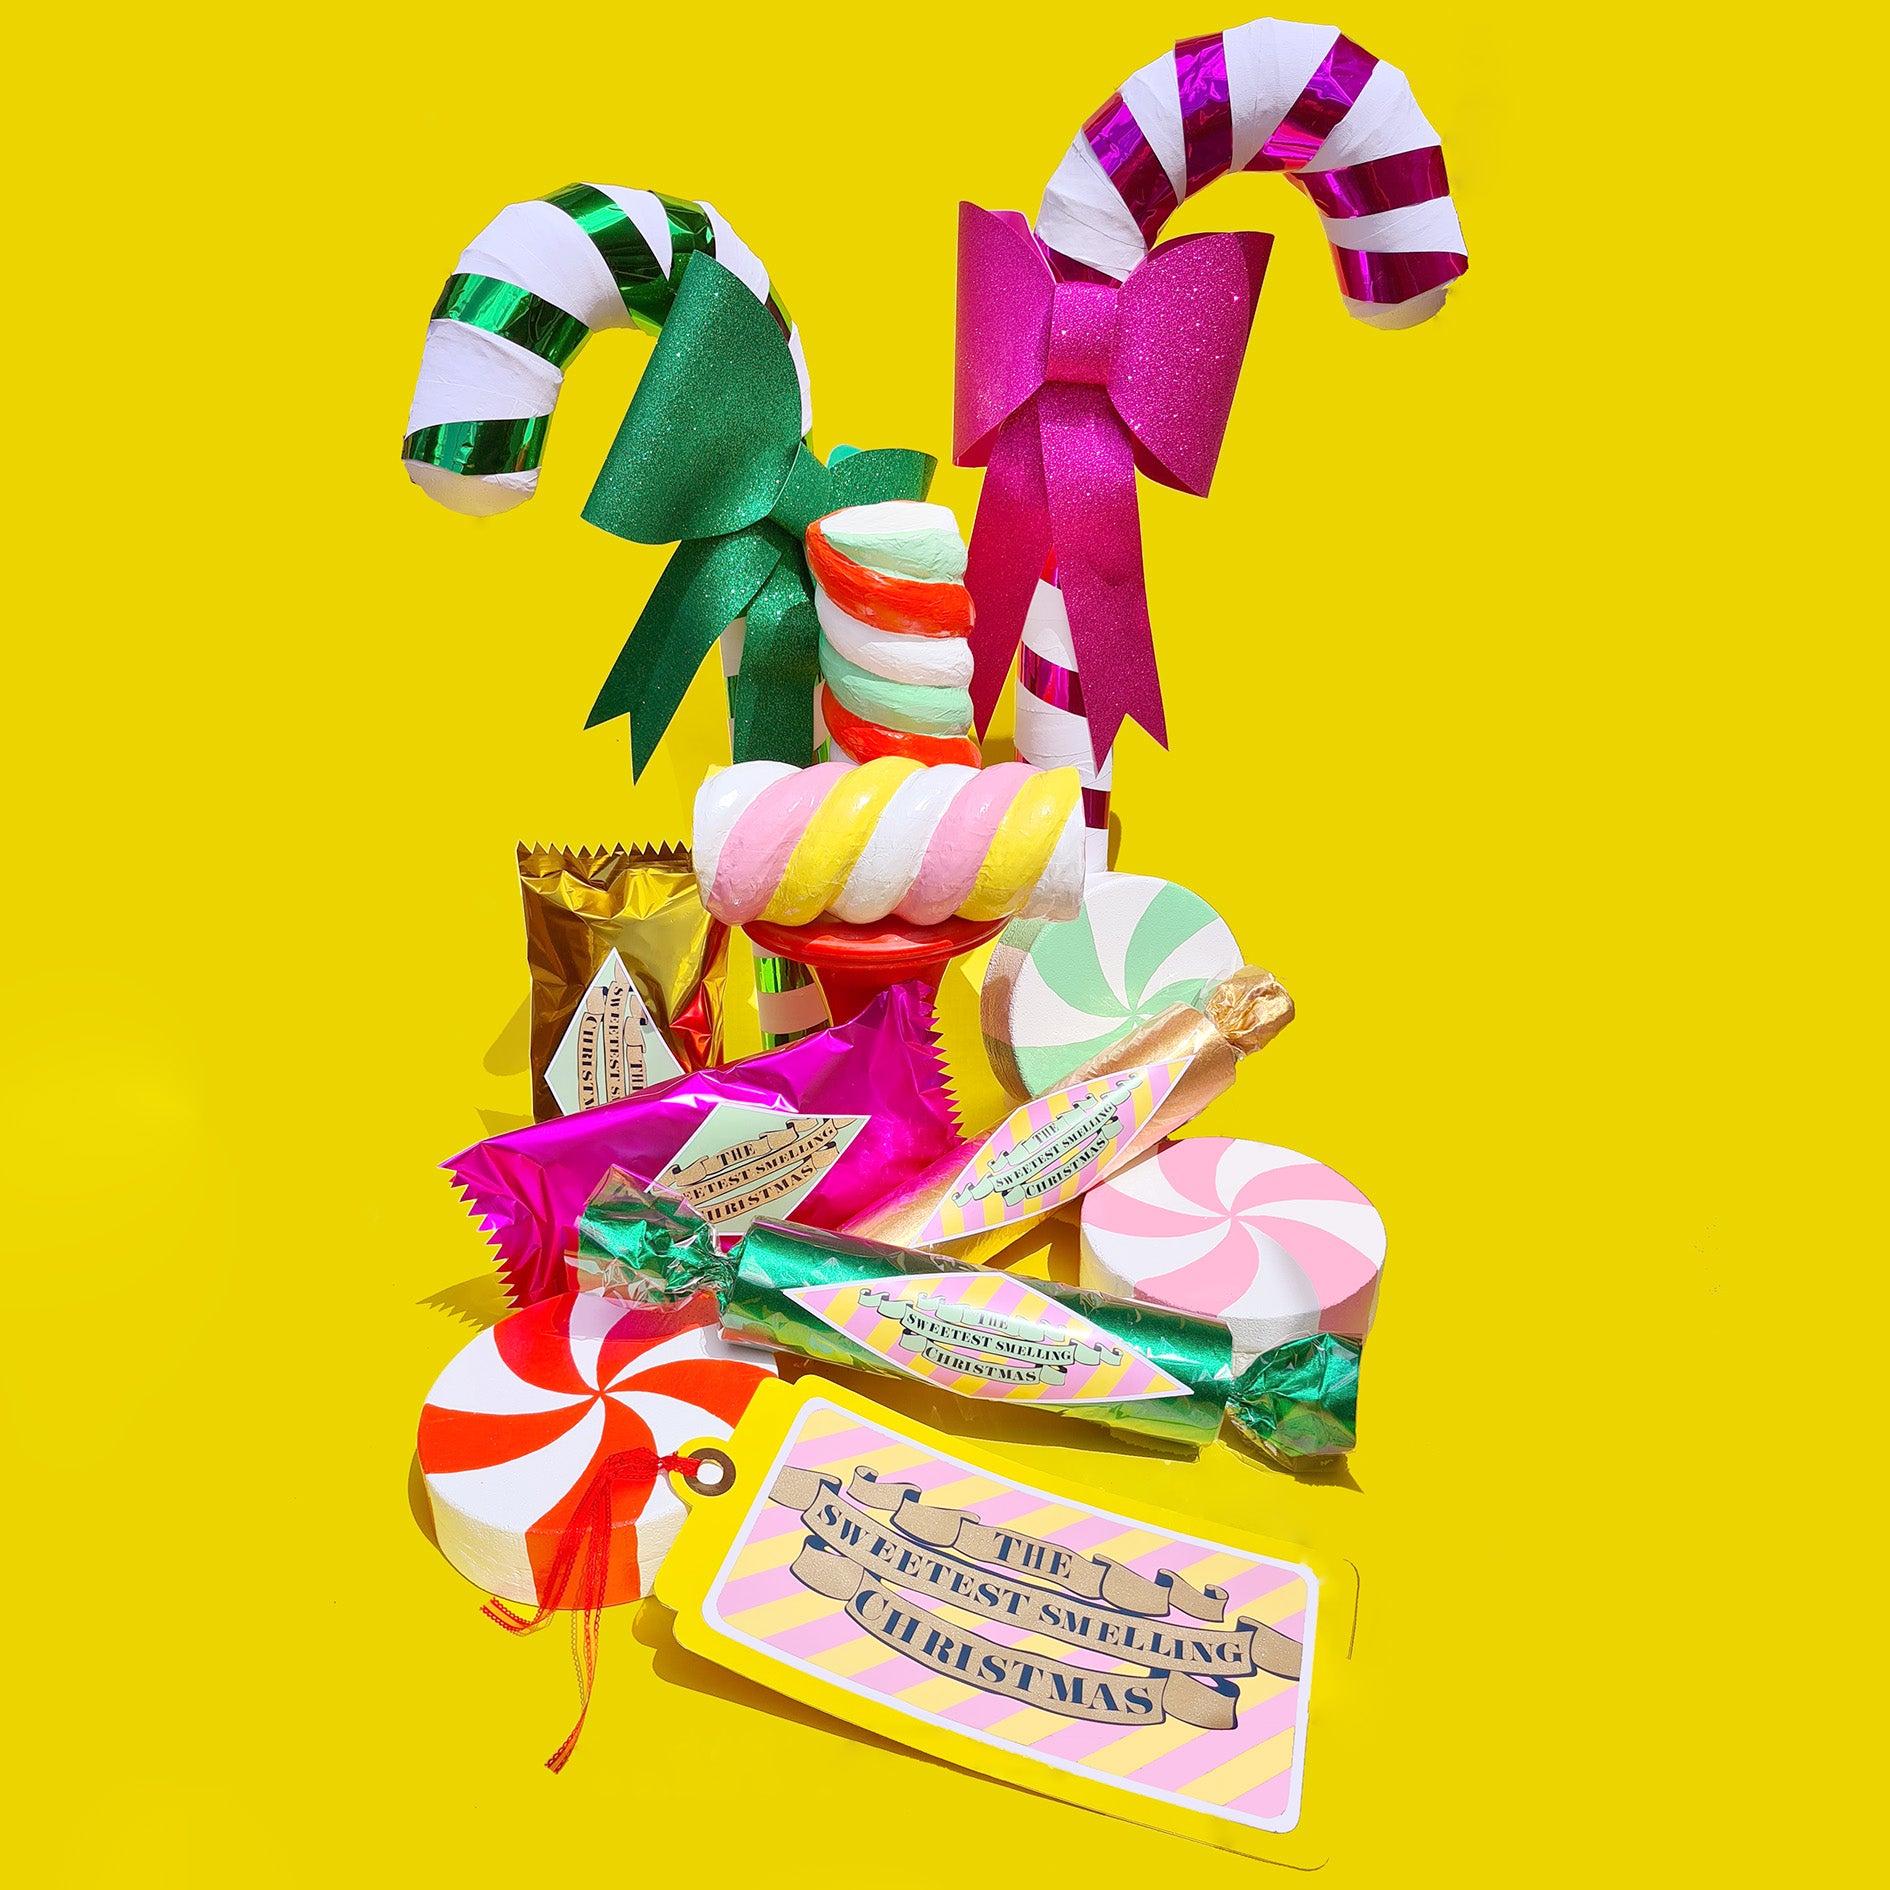 A collection of bright, shiny, giant, handmade Christmas candy props sit together on a yellow background. There are candy canes, wrapped lollies, marshmallow twists, and peppermint swirls.